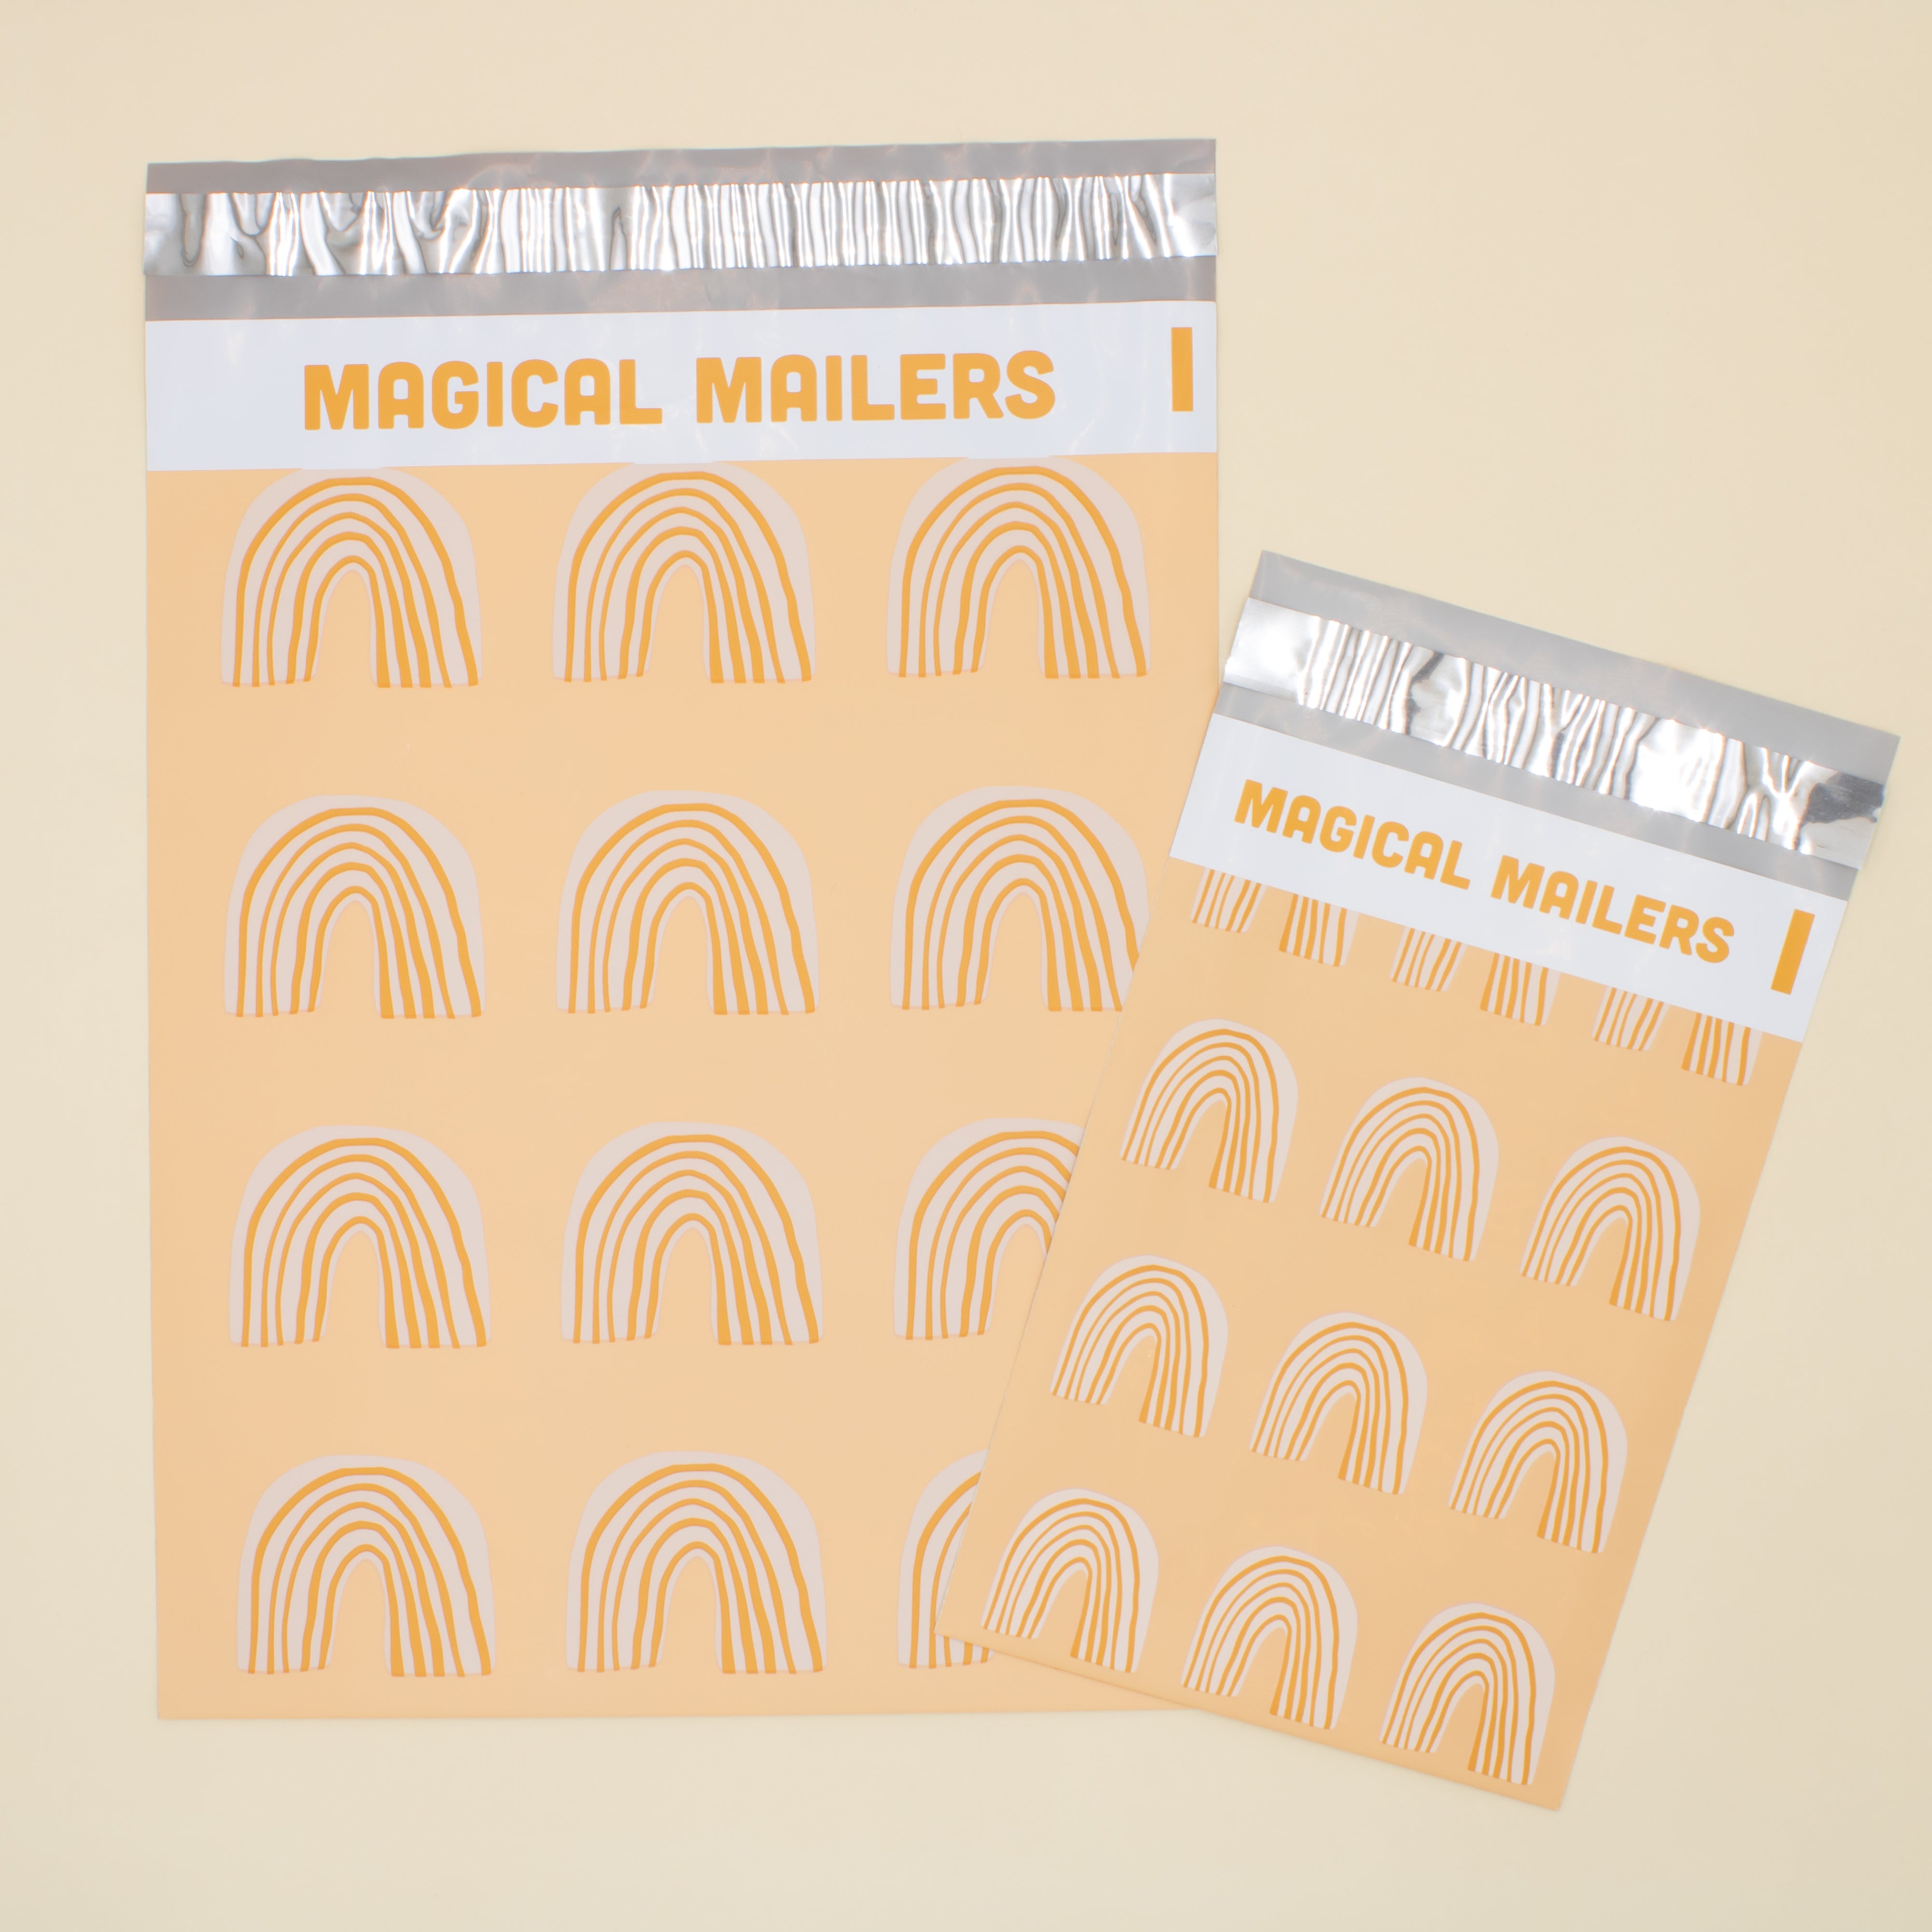 6 x 9" Poly Mailer - Over The Rainbow (ORANGE) - Magical Mailers